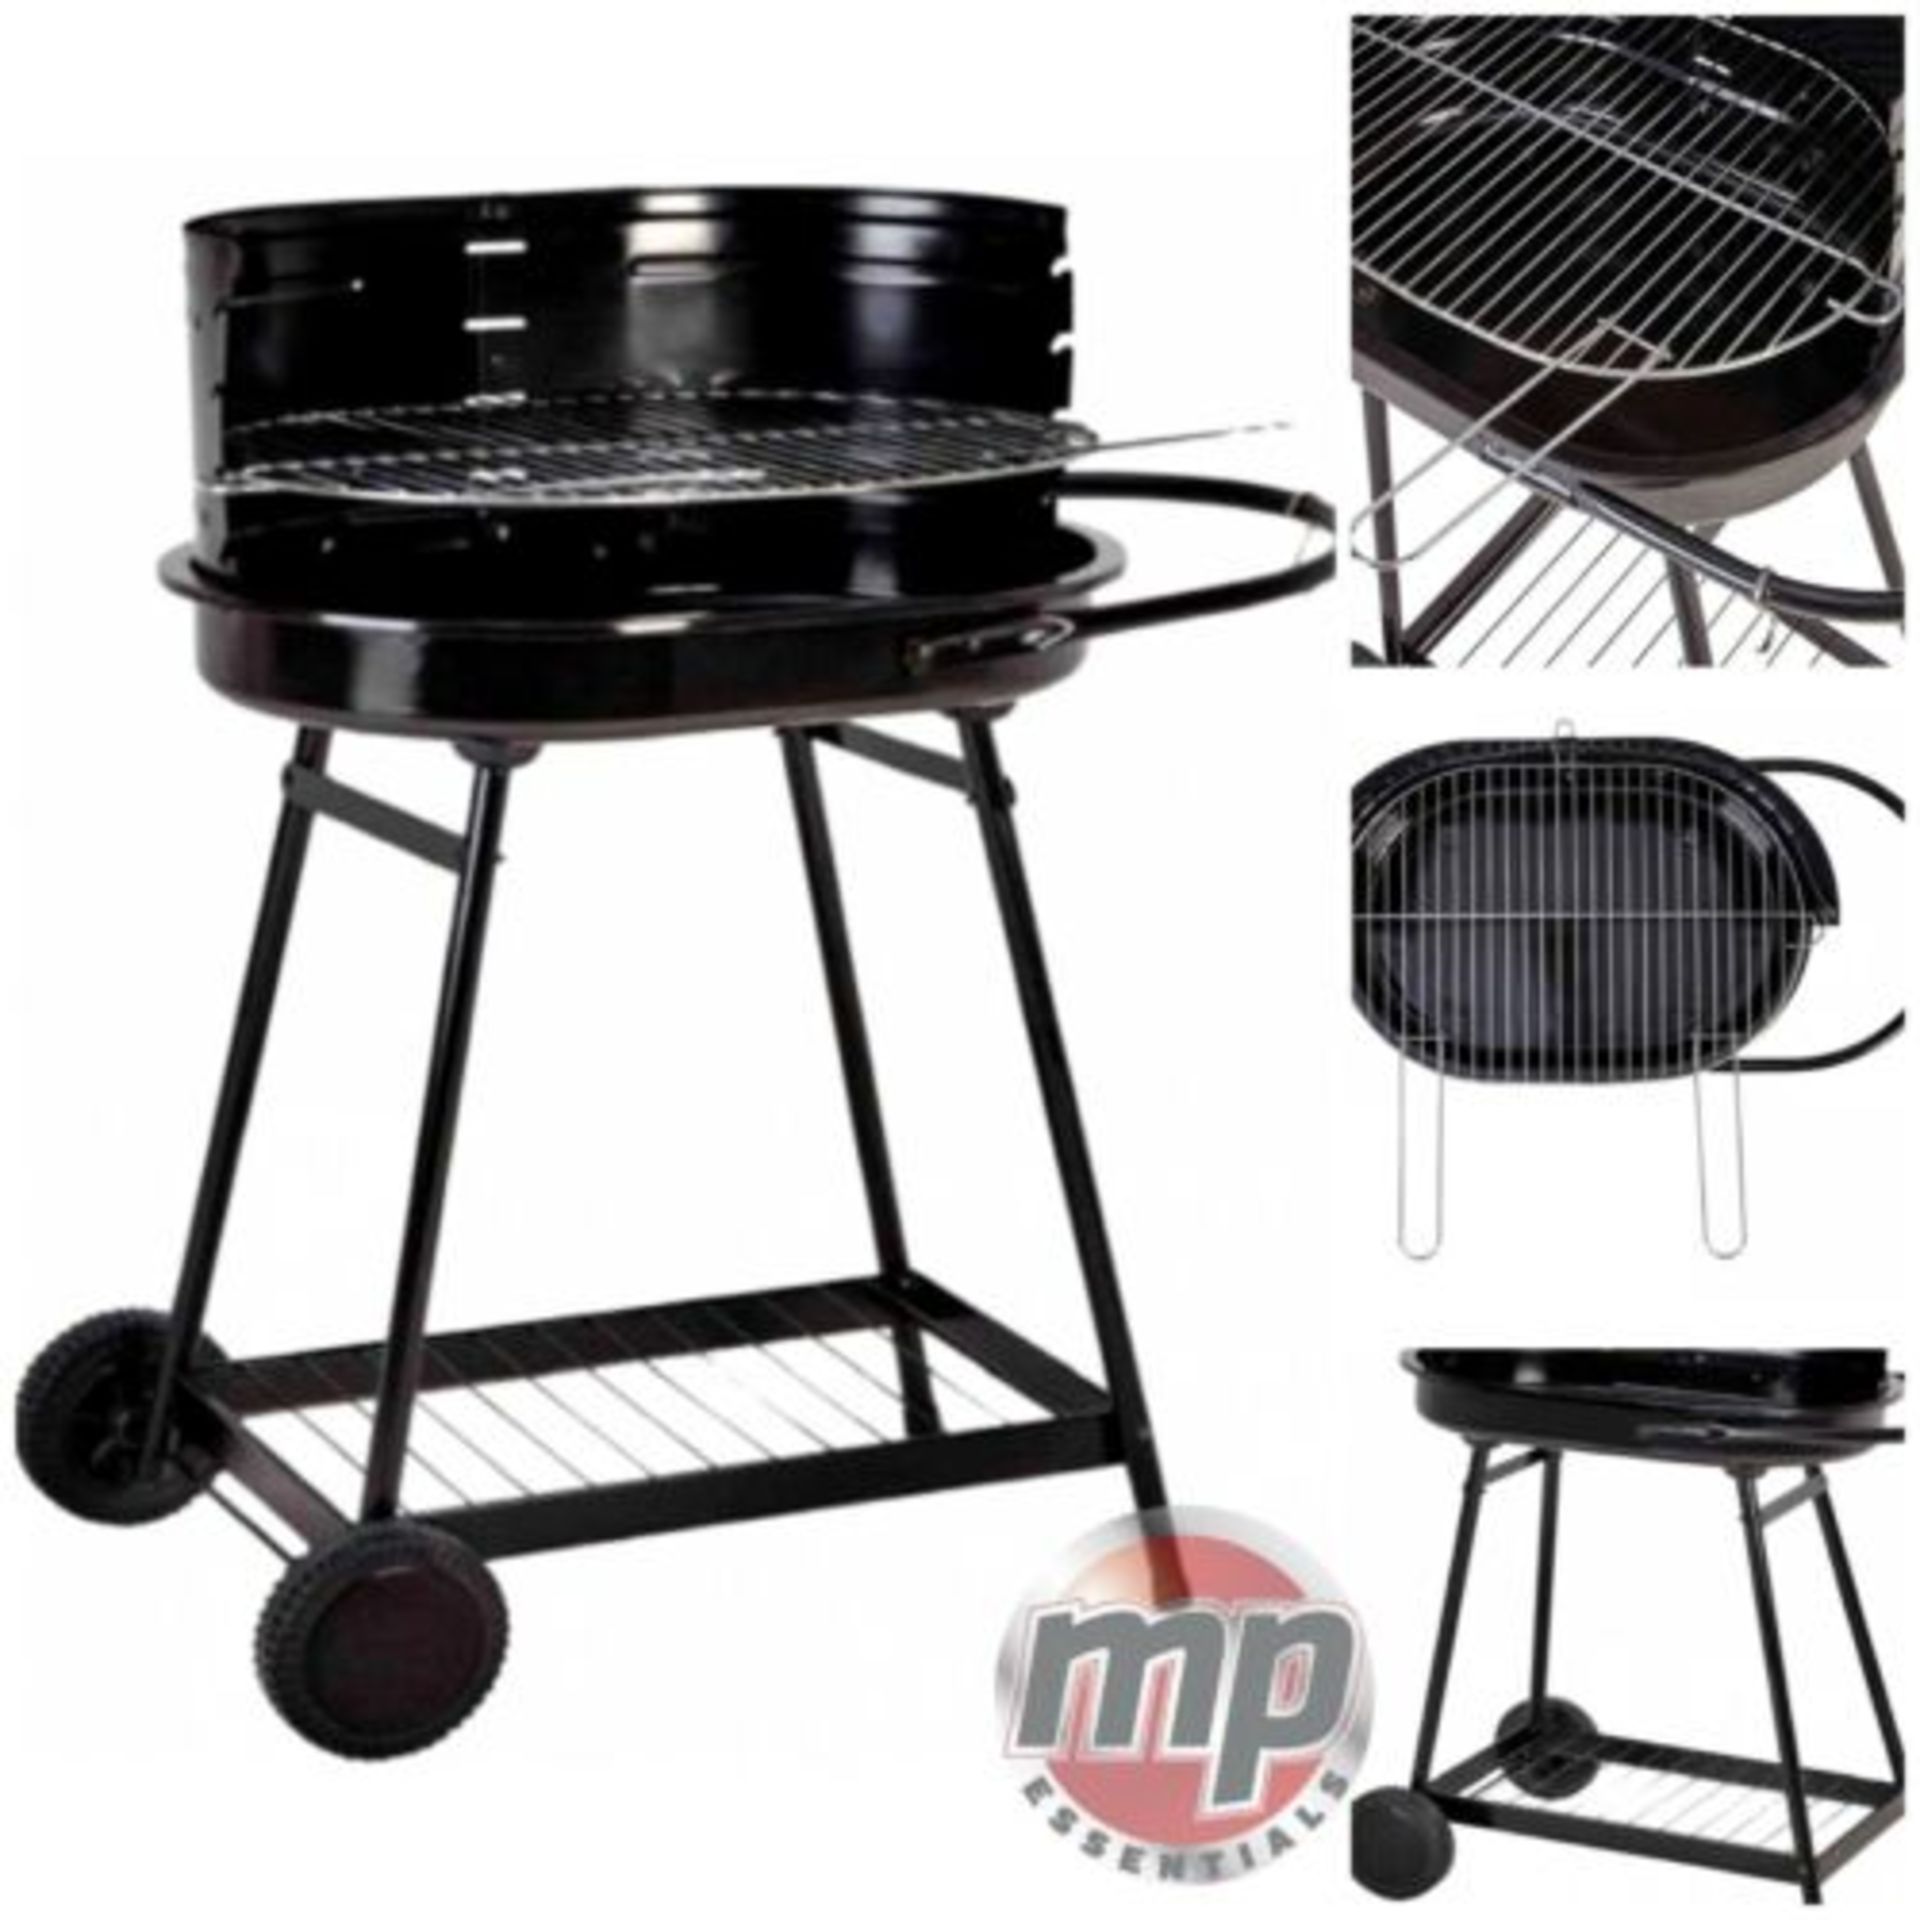 2 X BRAND NEW BOXED BARREN PORTABLE CHARCOAL TROLLEY BARBEQUE OUTDOOR GRILL WITH WHEELS BLACK RRP £